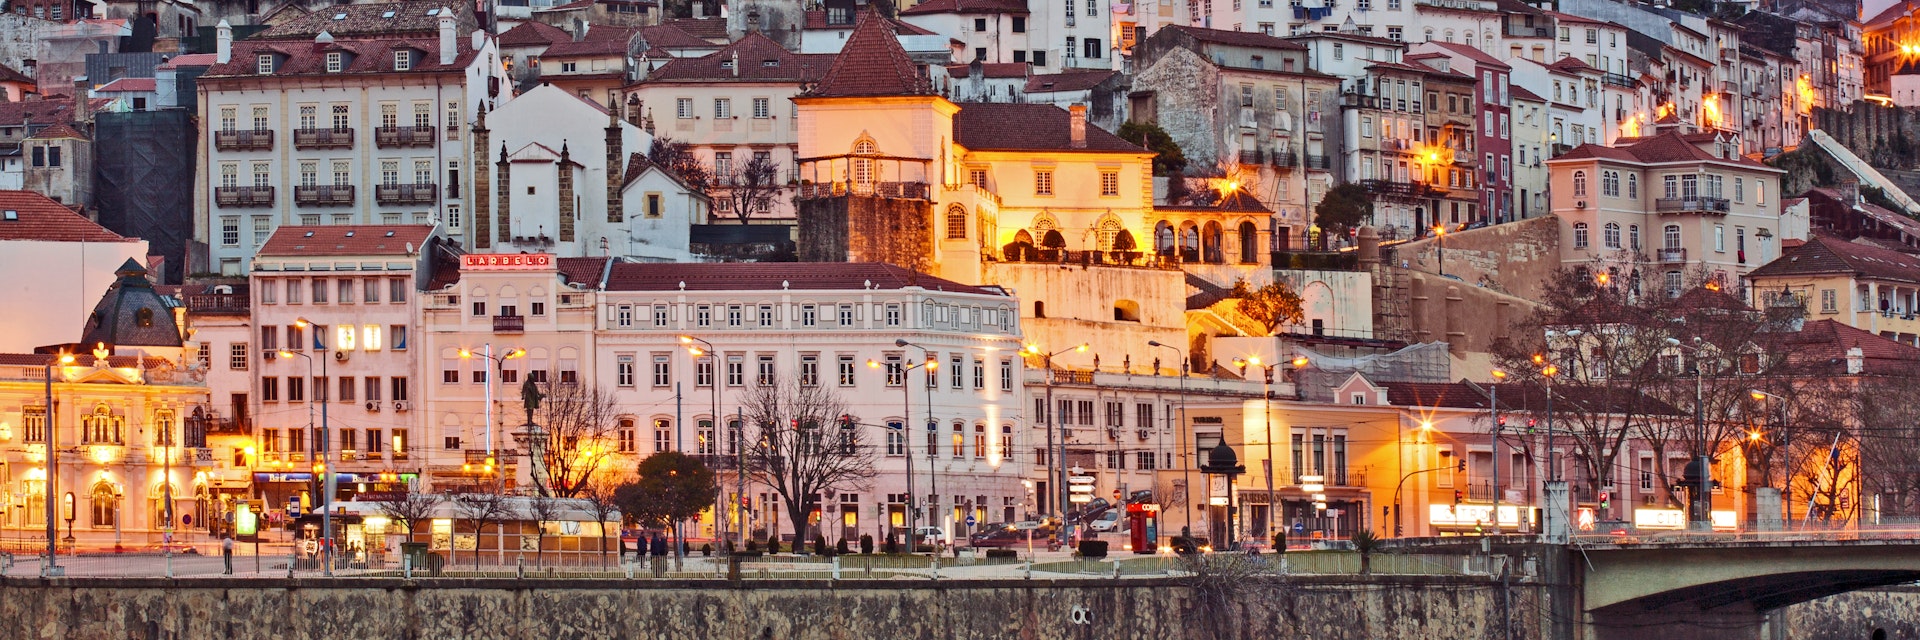 Coimbra travel - Lonely Planet | Portugal, Europe